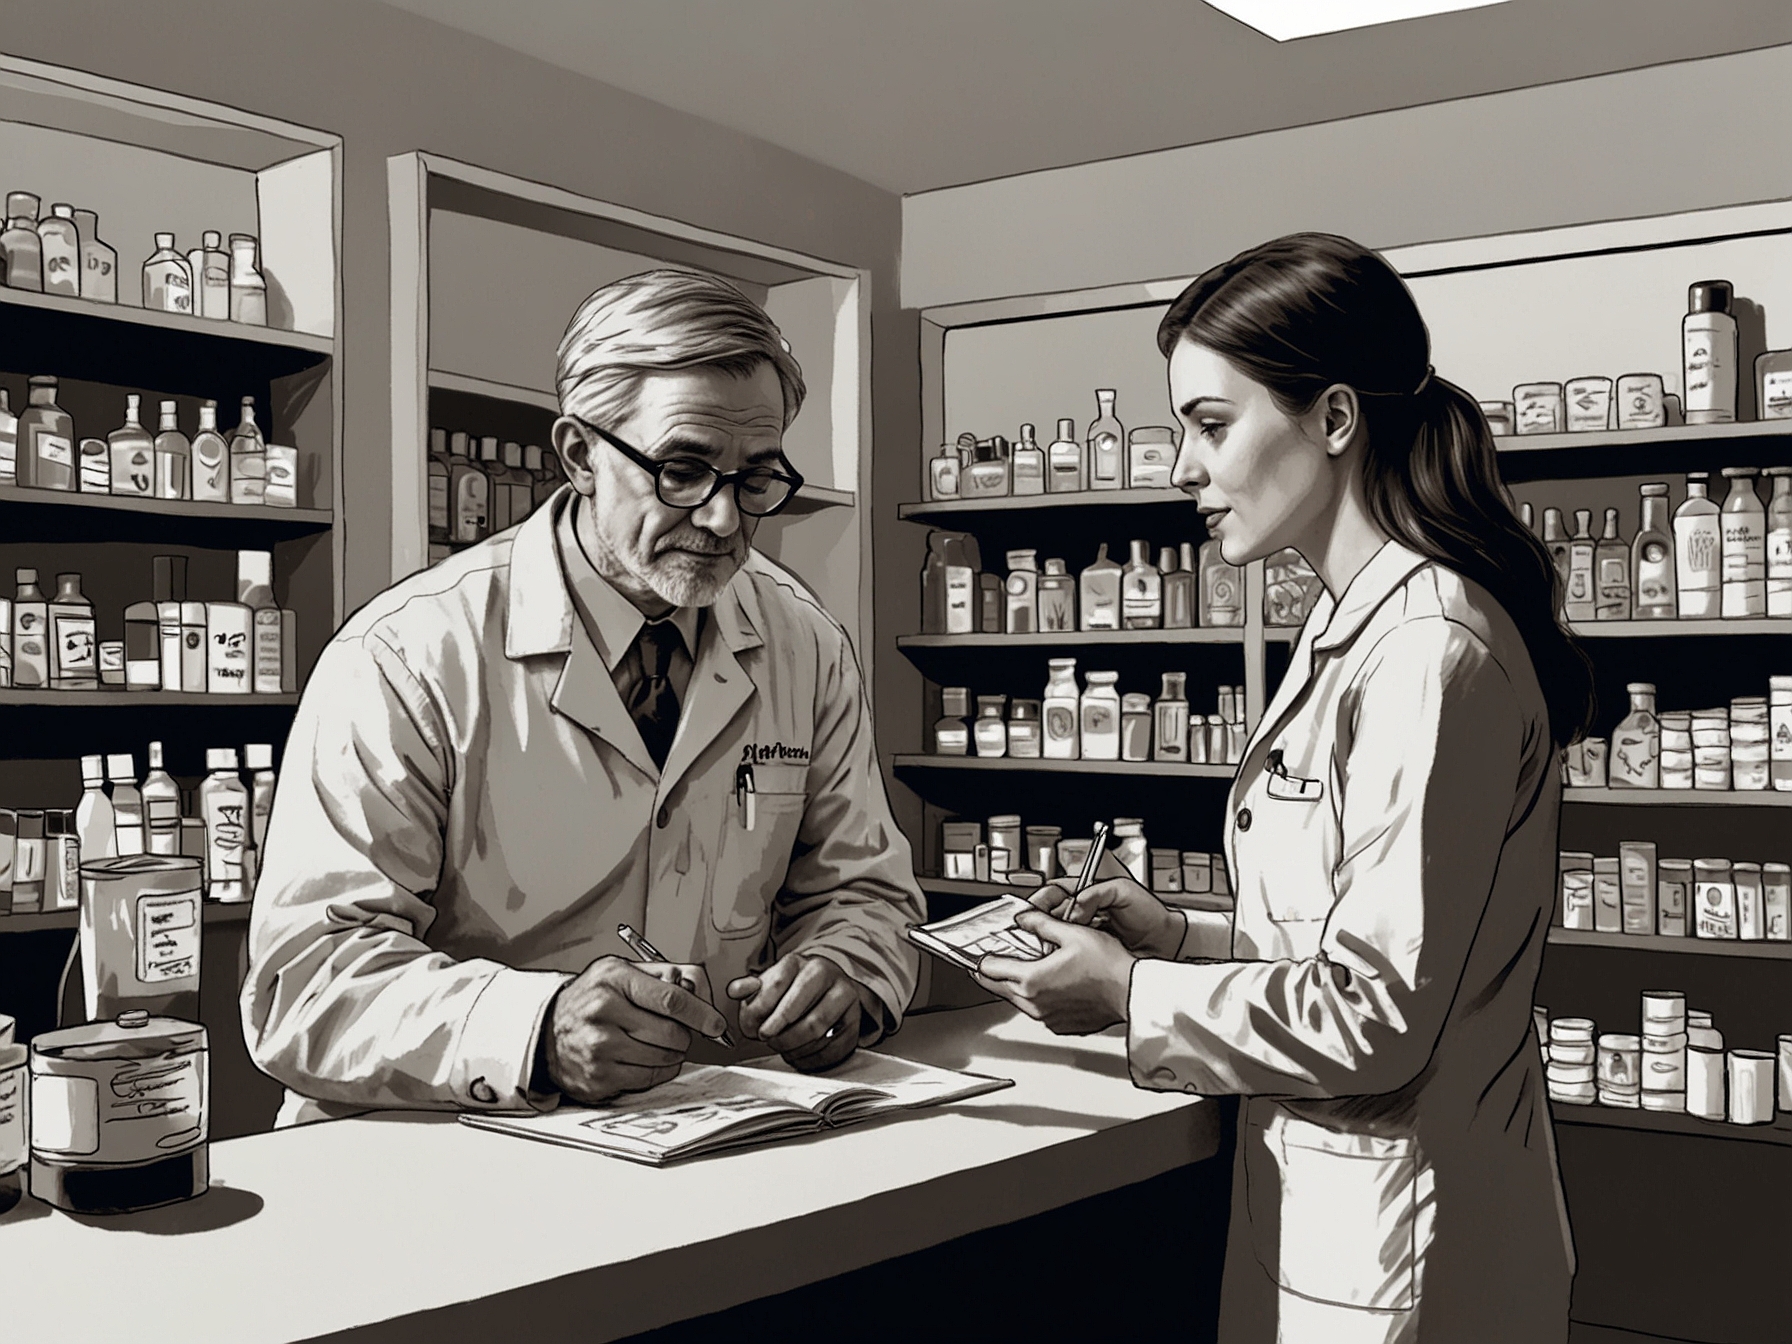 A pharmacist consulting with a patient, highlighting the new role of pharmacists in prescribing medications independently, within a well-equipped pharmacy setting.